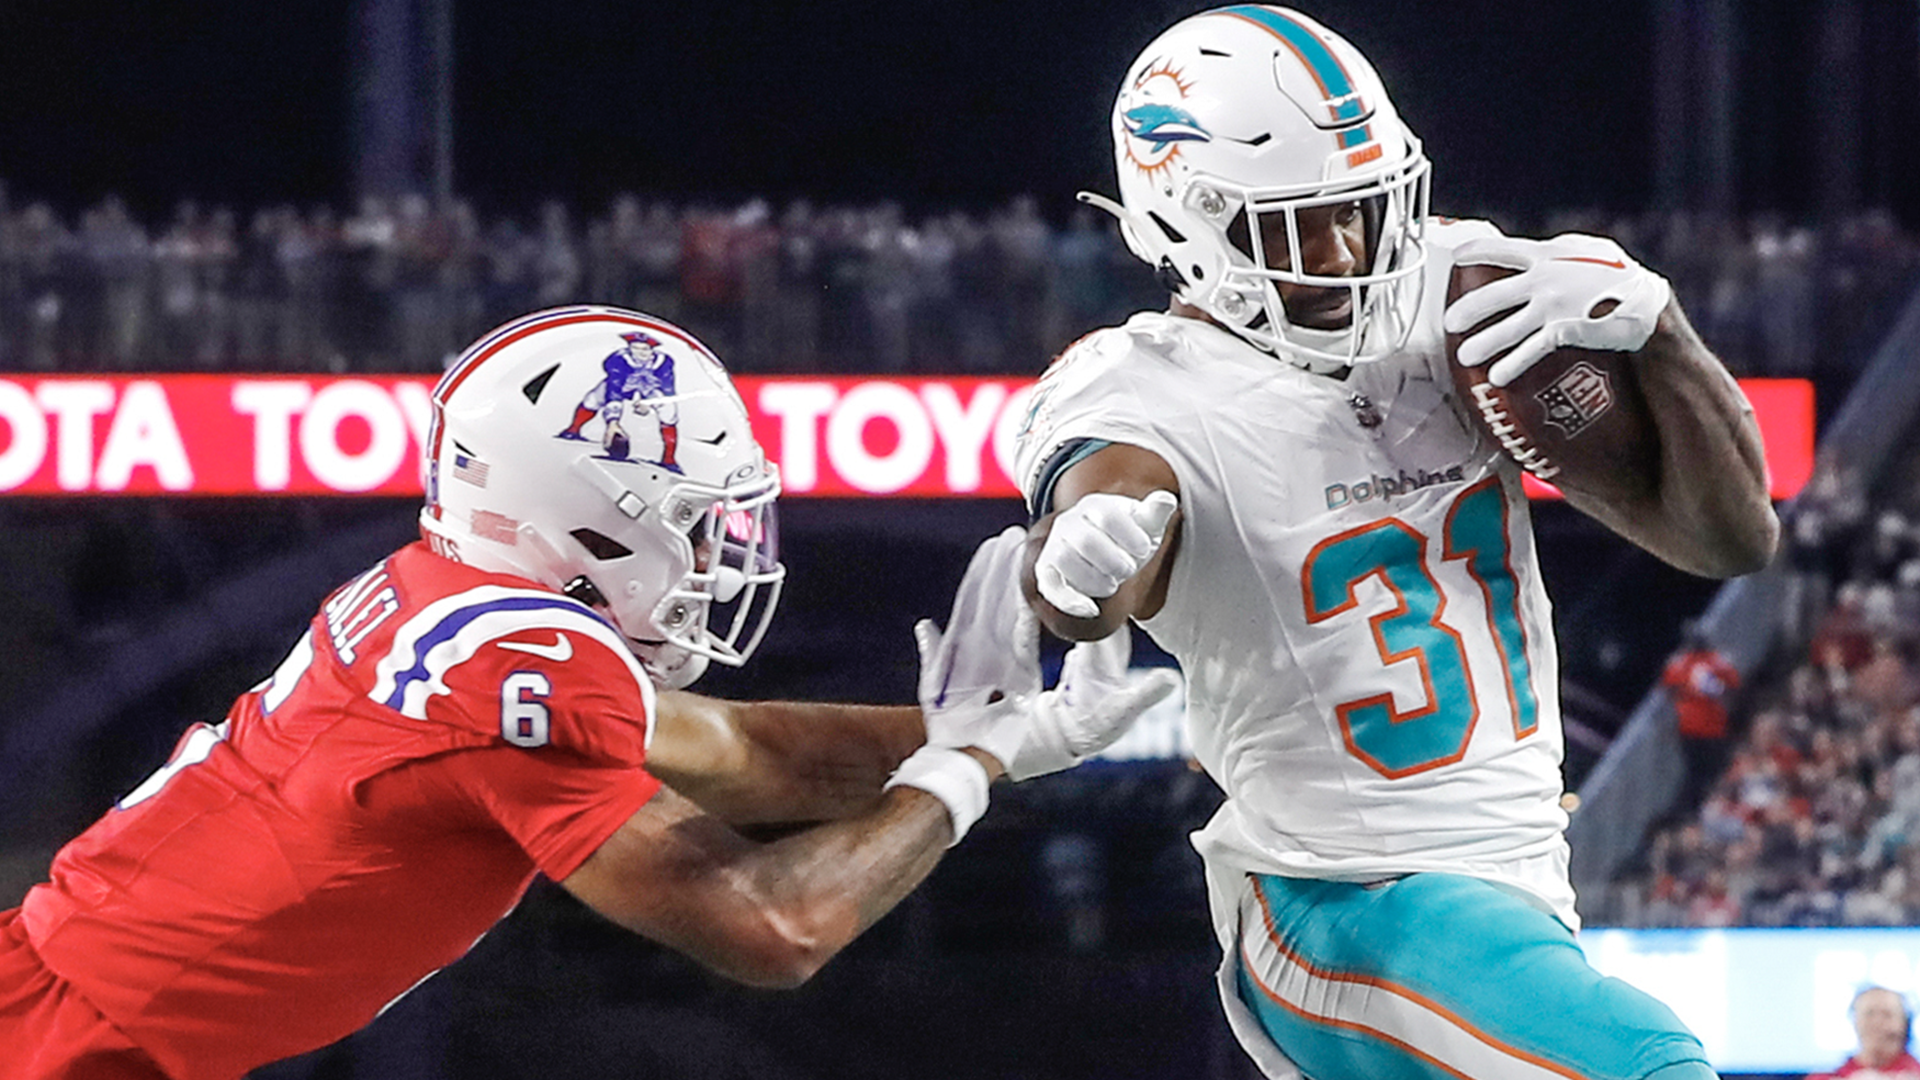 Miami Dolphins 24-17 New England Patriots: Hosts fall to 0-2 in NFL for  first time since 2001, NFL News